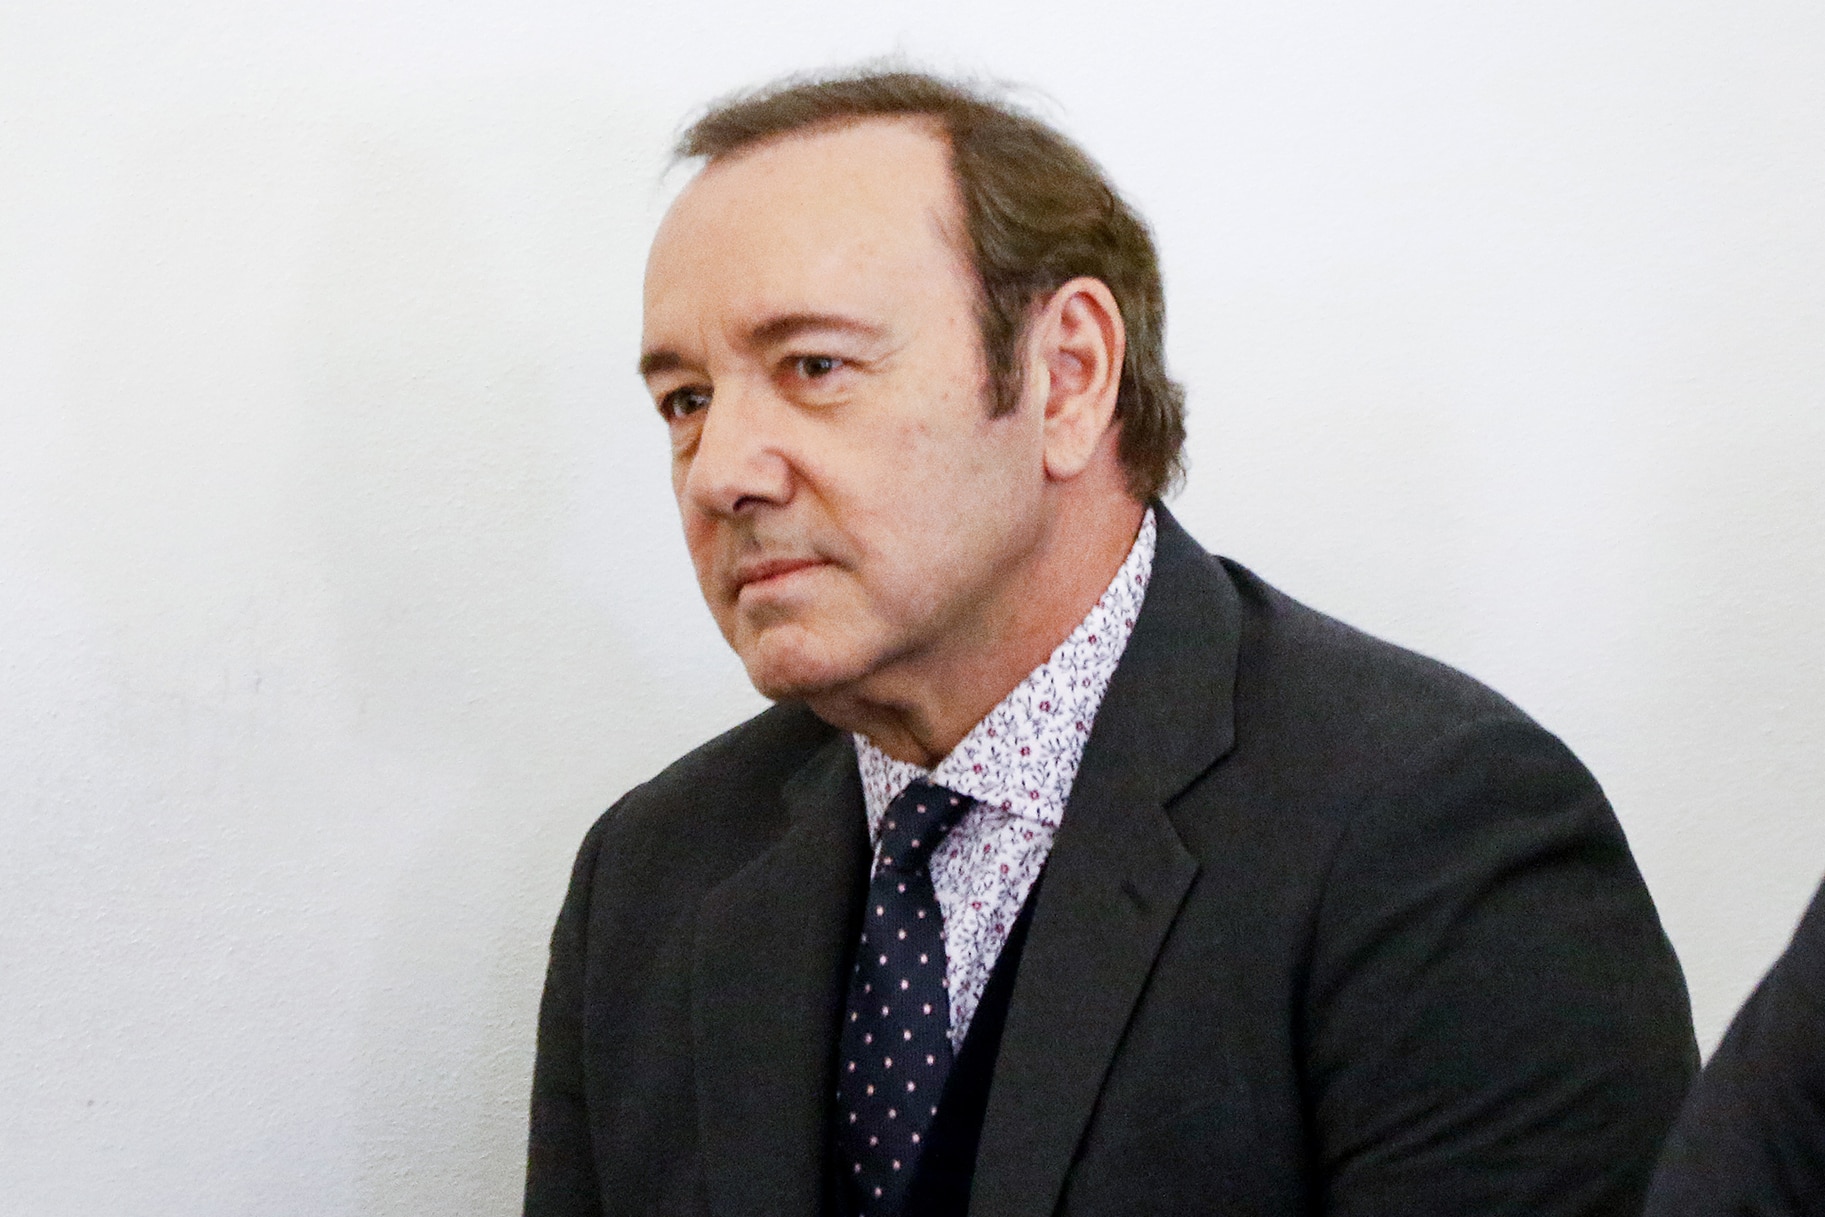 Kevin Spacey attends his arraignment for sexual assault charges